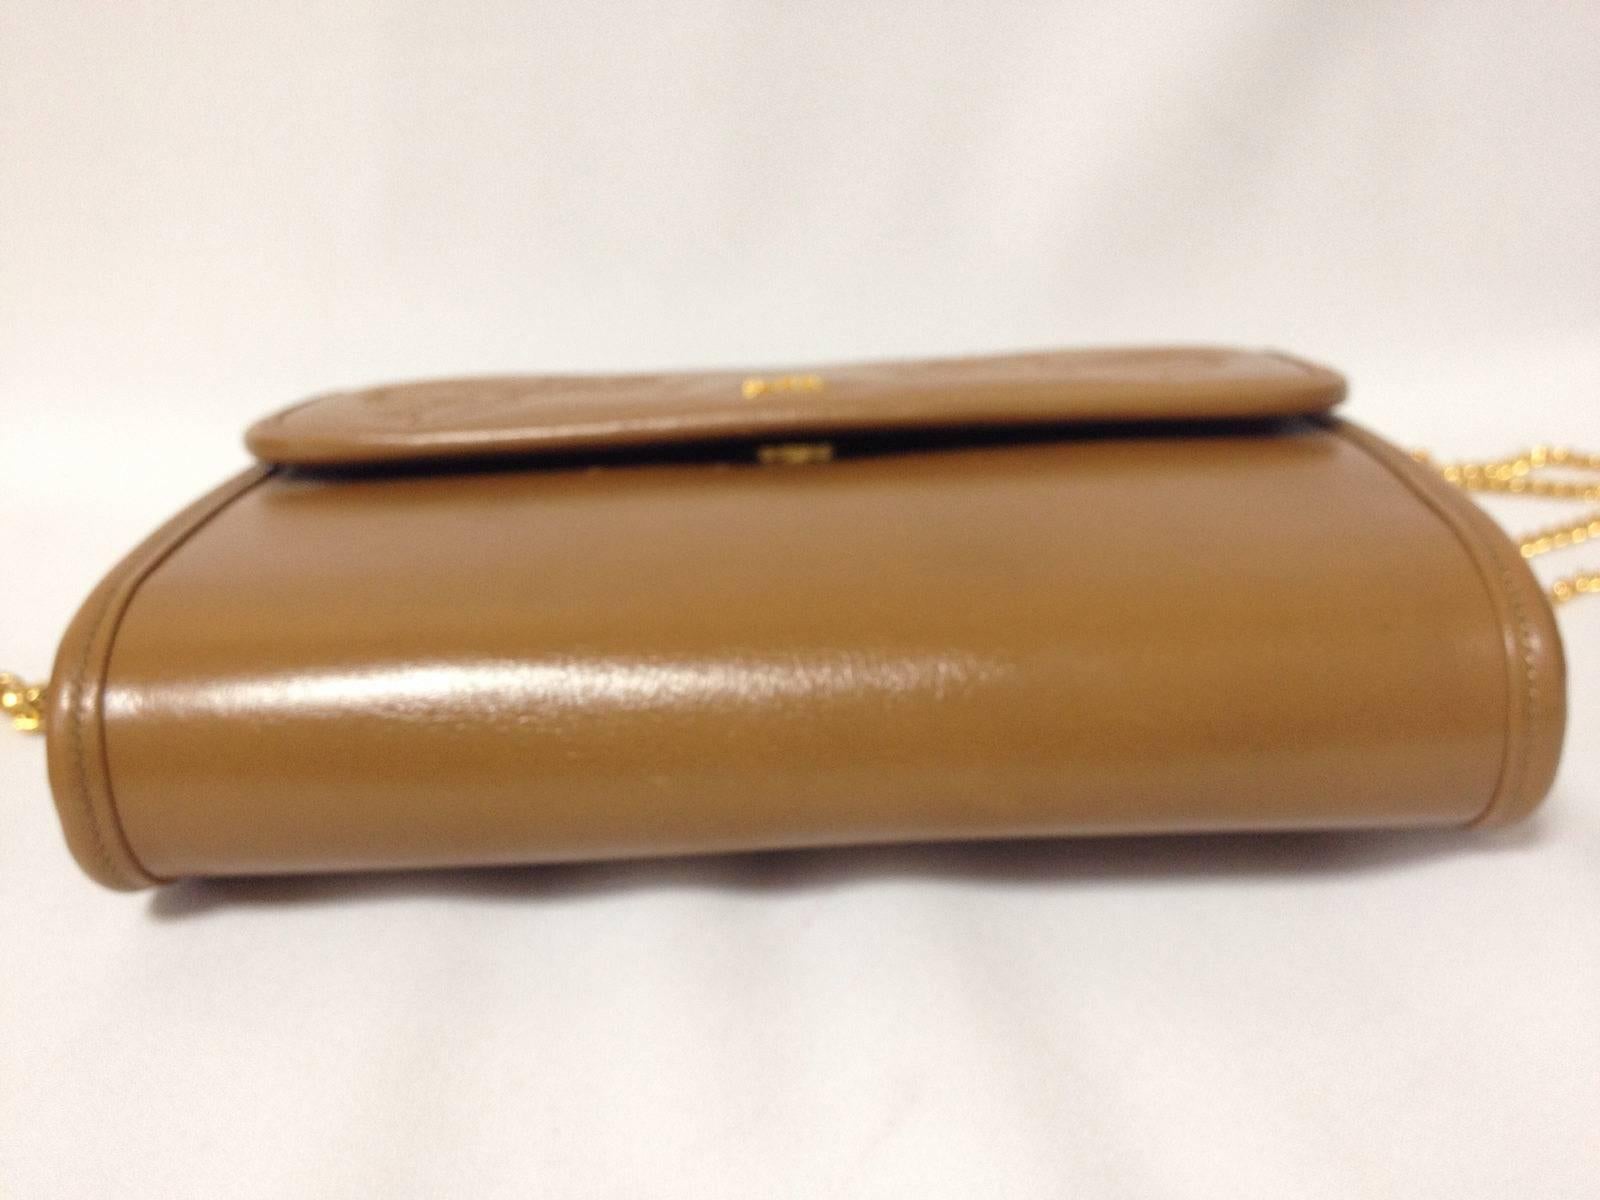 Vintage Nina Ricci tanned brown leather mini clutch shoulder bag with gold chain In Excellent Condition For Sale In Kashiwa, Chiba